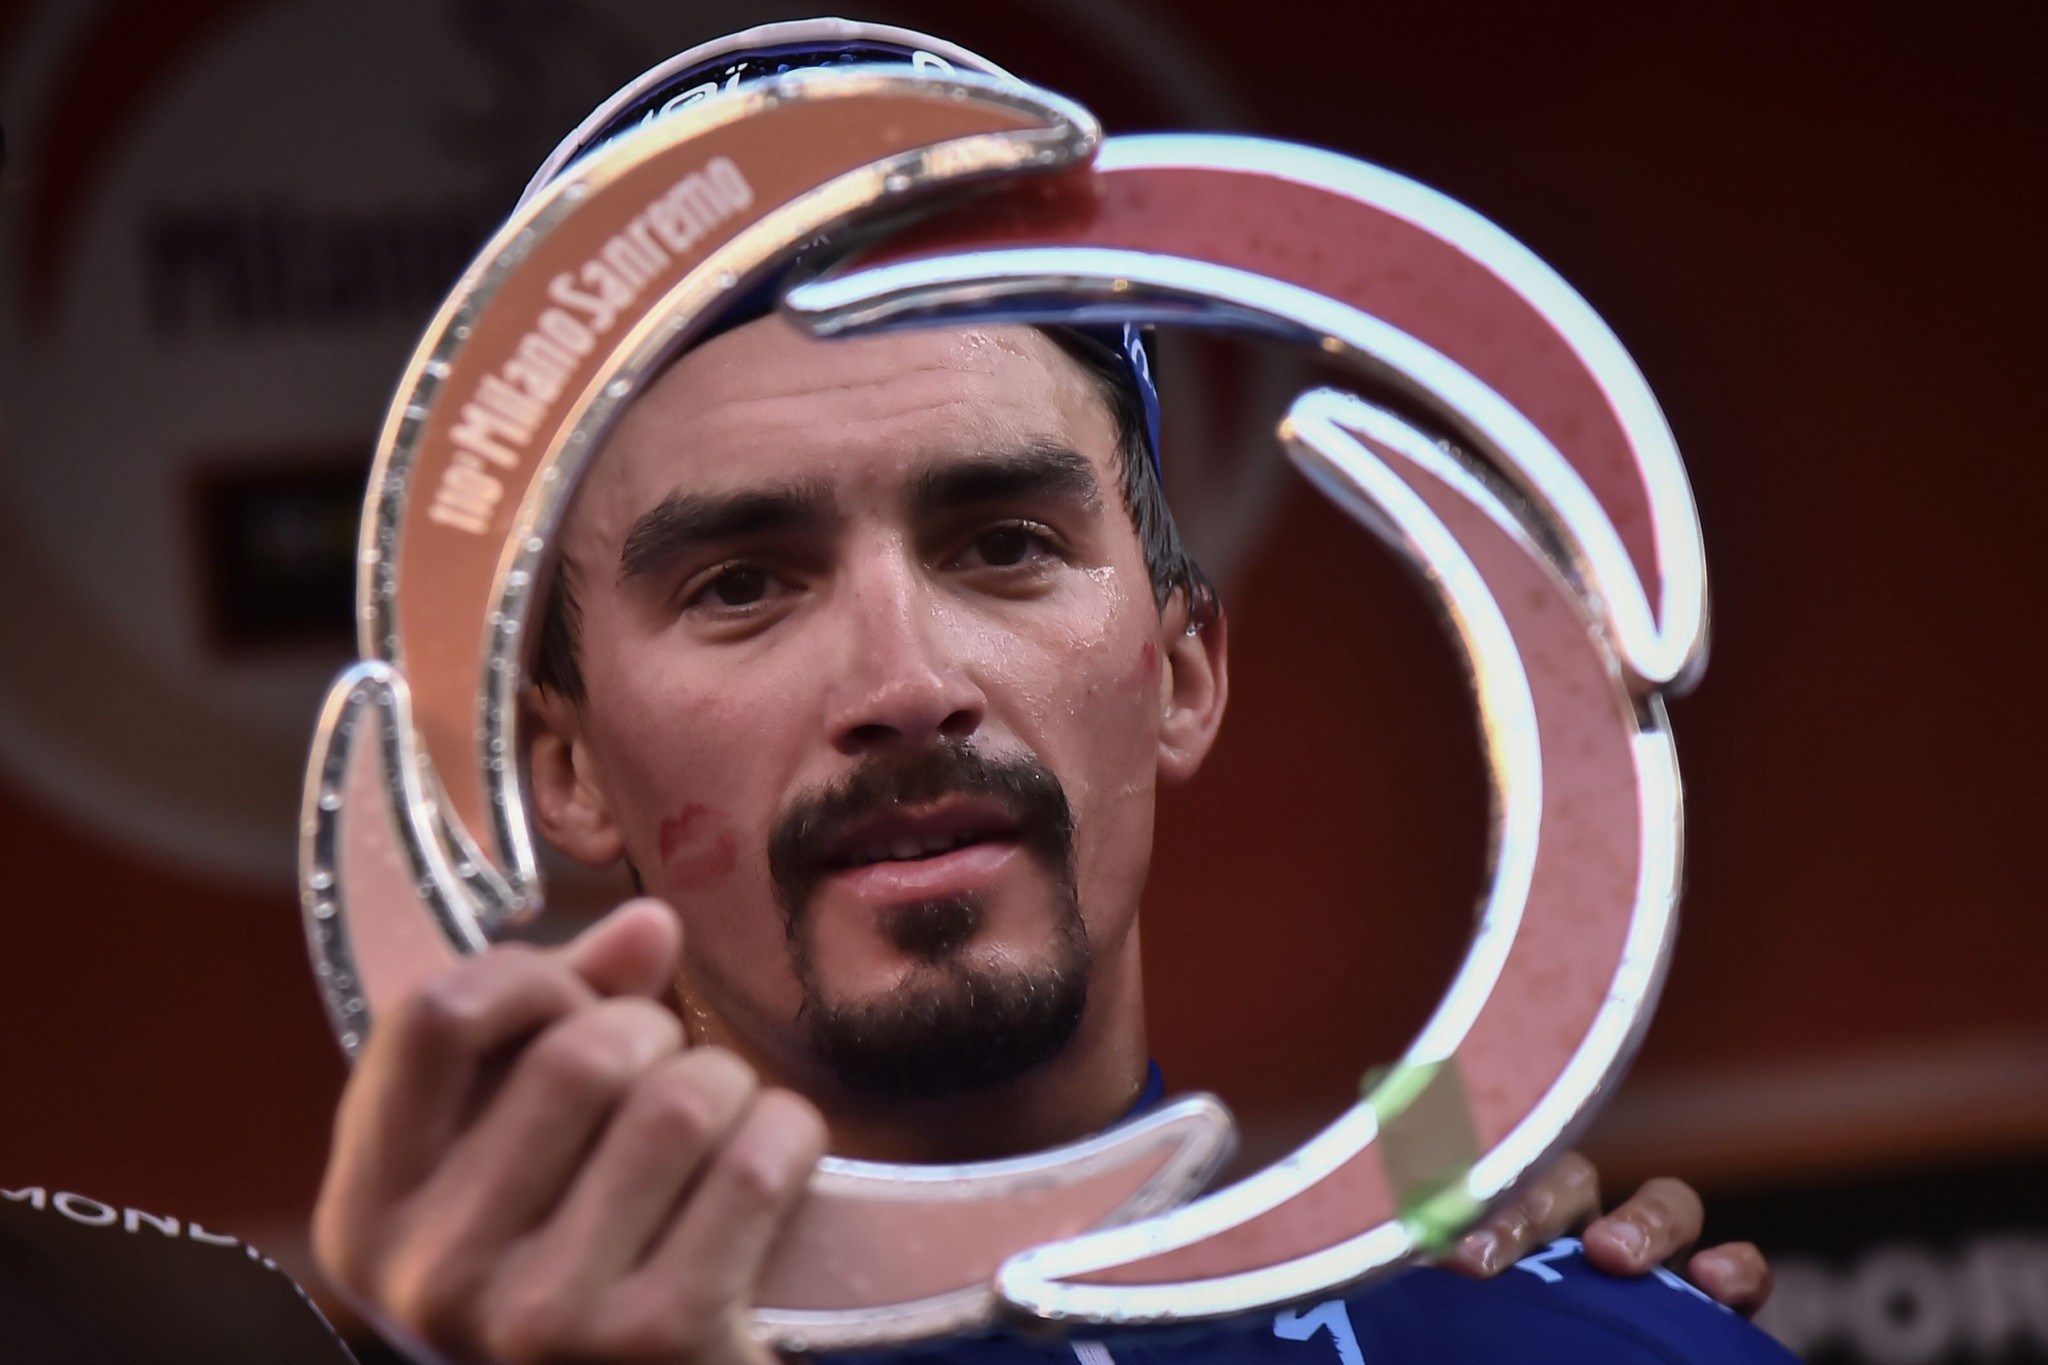 Alaphilippe sprints to victory at Milan-San Remo